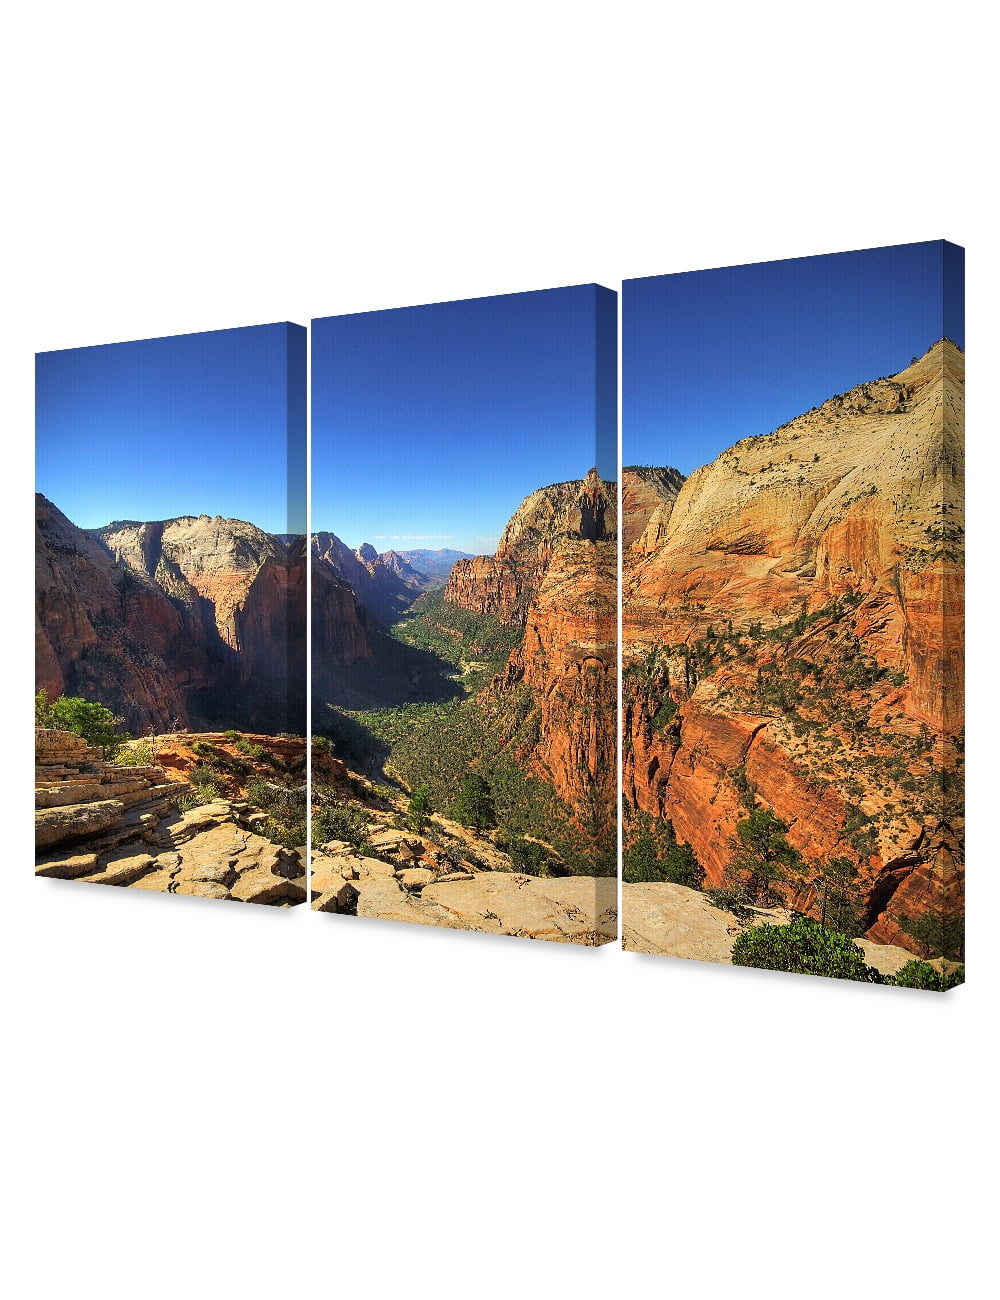 DecorArts Angel's Landing at Zion National Park, Utah.(Triptych). Giclee  Canvas Prints for Wall Decor. 48x32